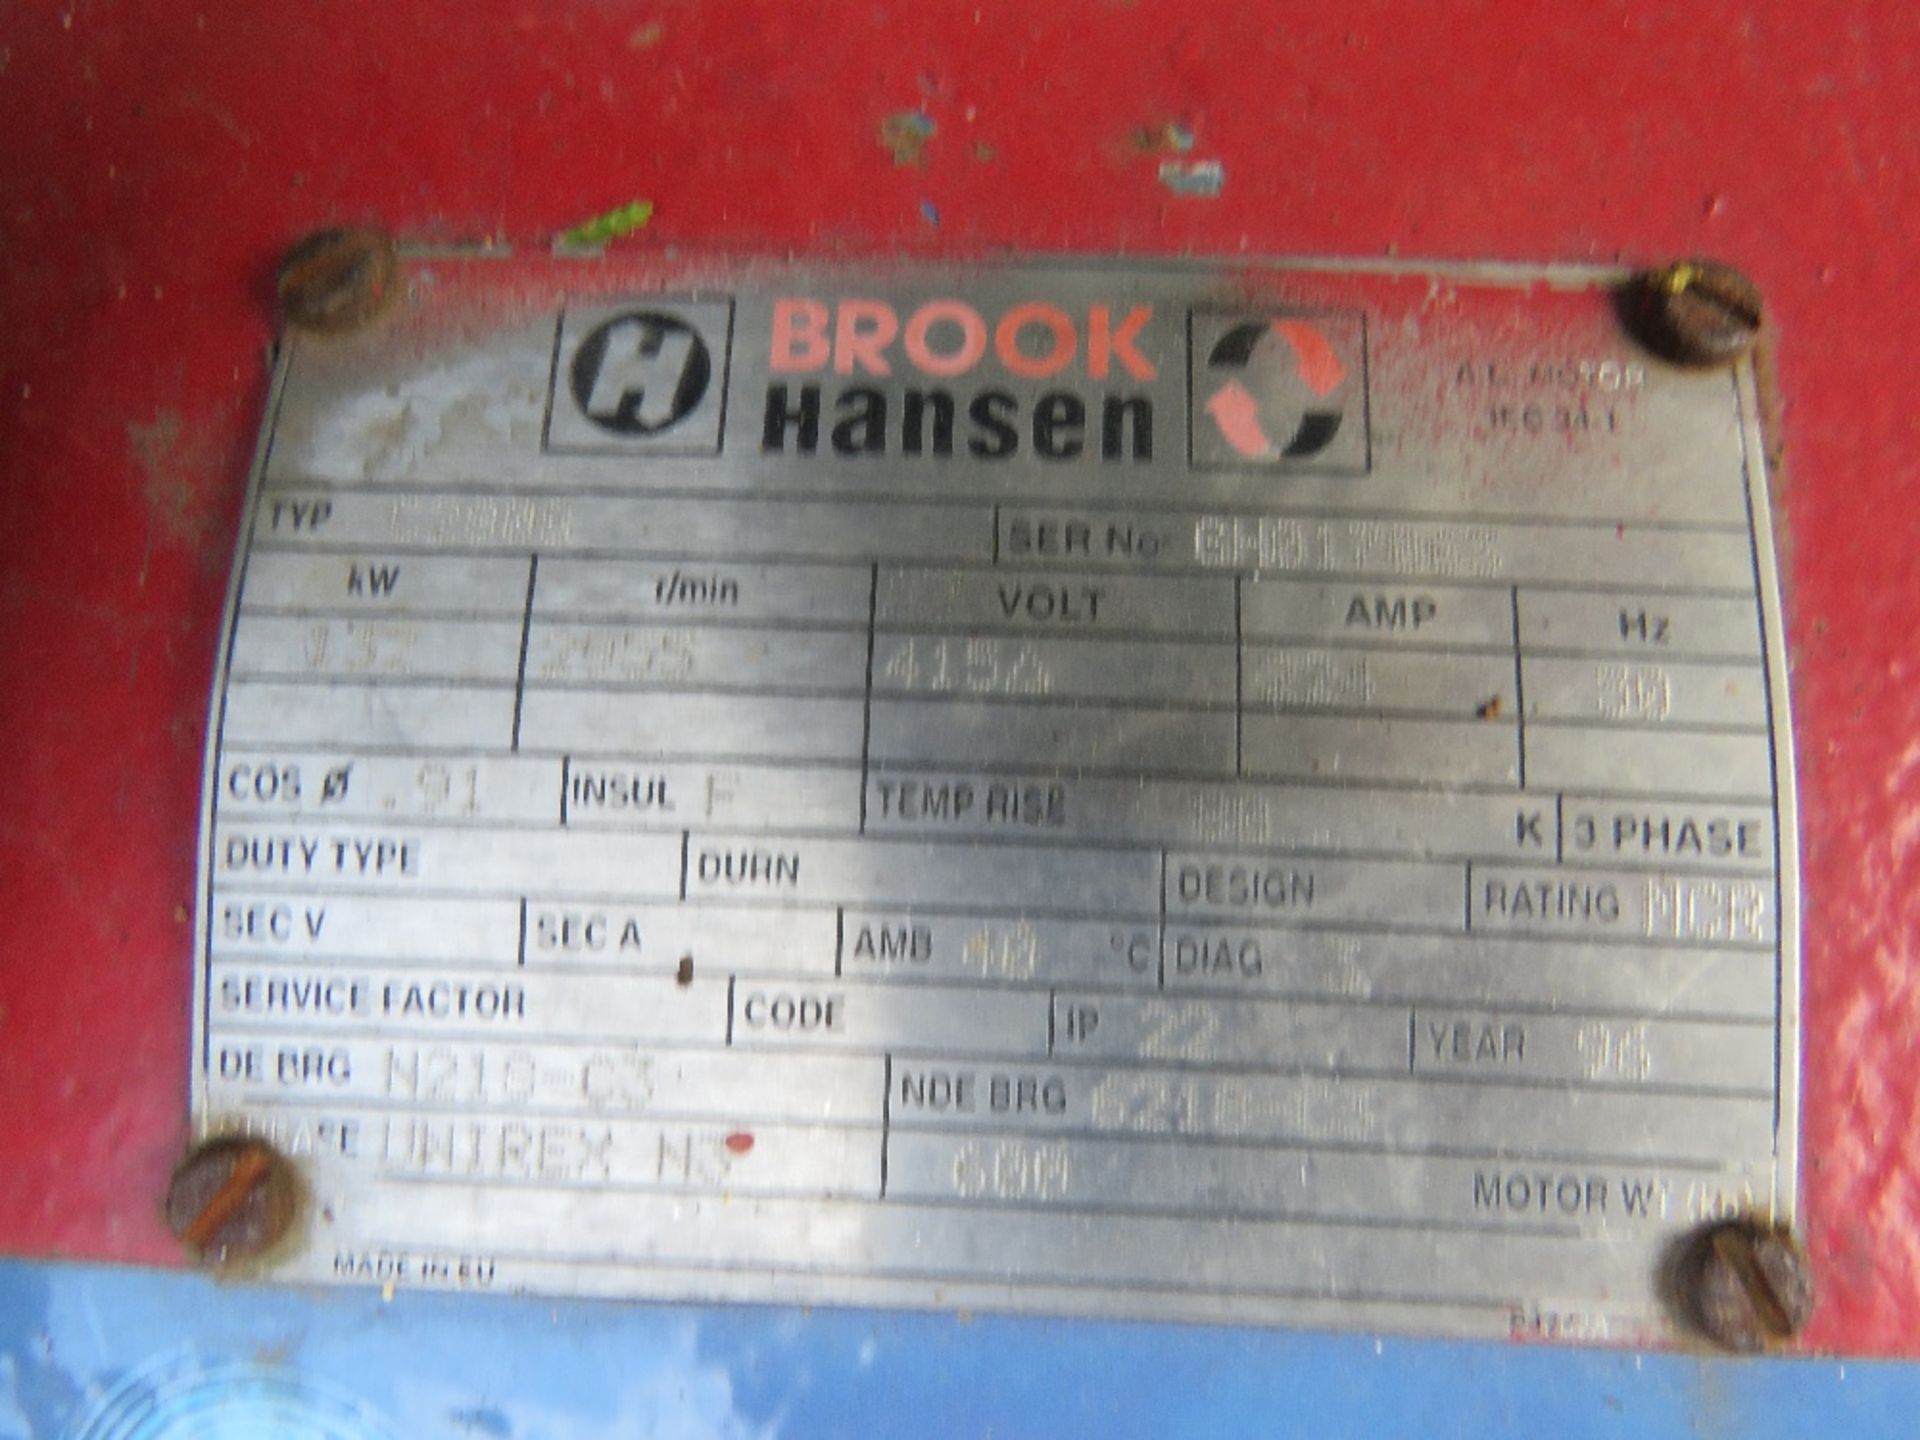 STERLING 3 PHASE POWERED FIRE PUMP. POWERED BY BROOK HANSEN 132KW MOTOR.....THIS LOT IS SOLD UNDER T - Image 4 of 7